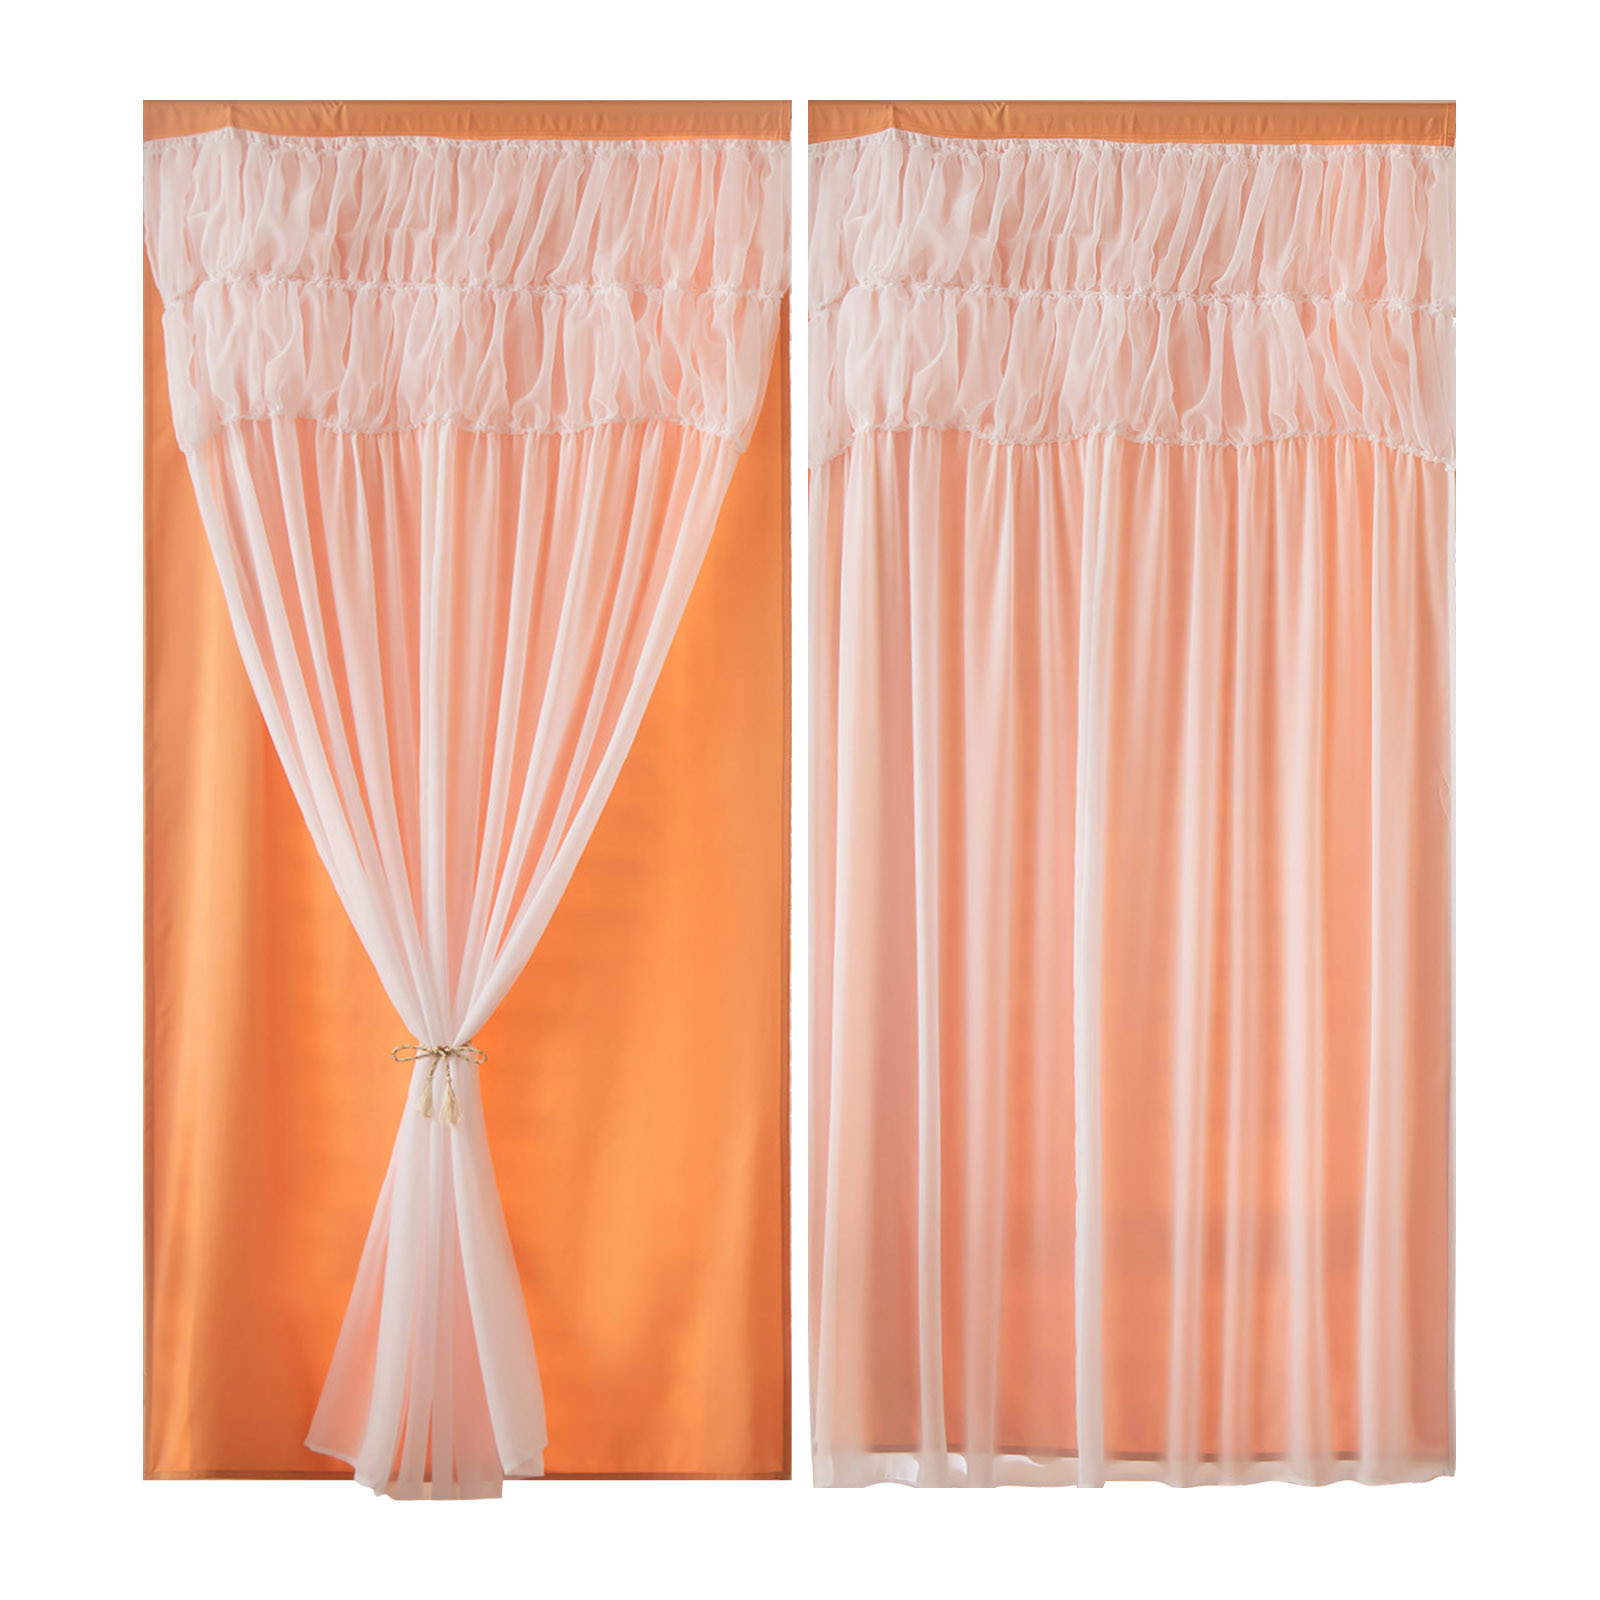 Curtain Short Length Cold Curtains 2 Panels Home Curtains Layered Solid Plain Panels And Sheer Sheer Curtains Window Curtain Panels 39"" Wide Curtains for Windows 66 to 120 Curtains Rose - image 1 of 9